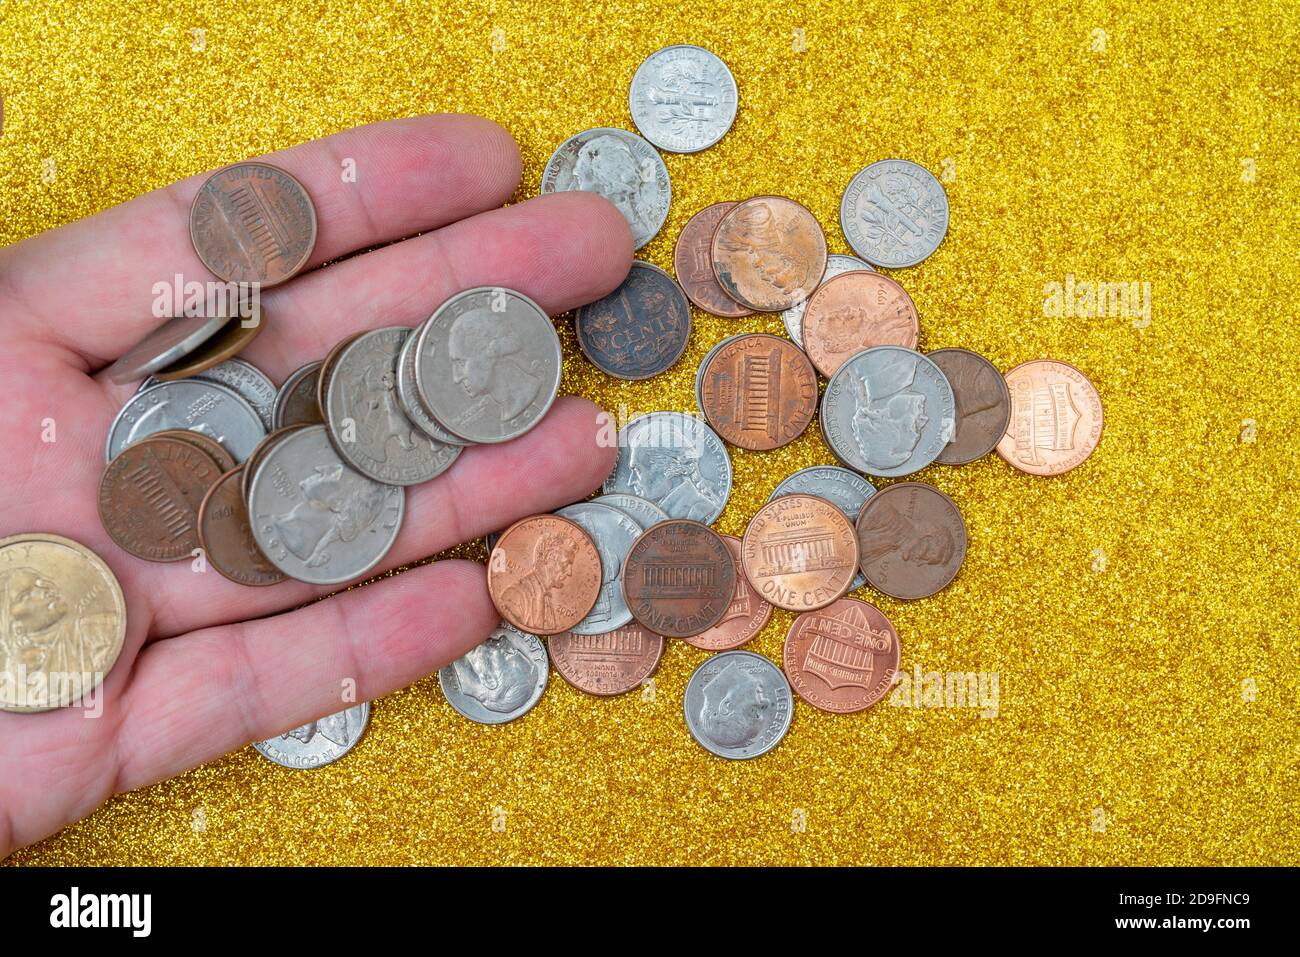 Metallic American cents. Storage and accumulation of money in the financial system of banks and loans. Stock Photo